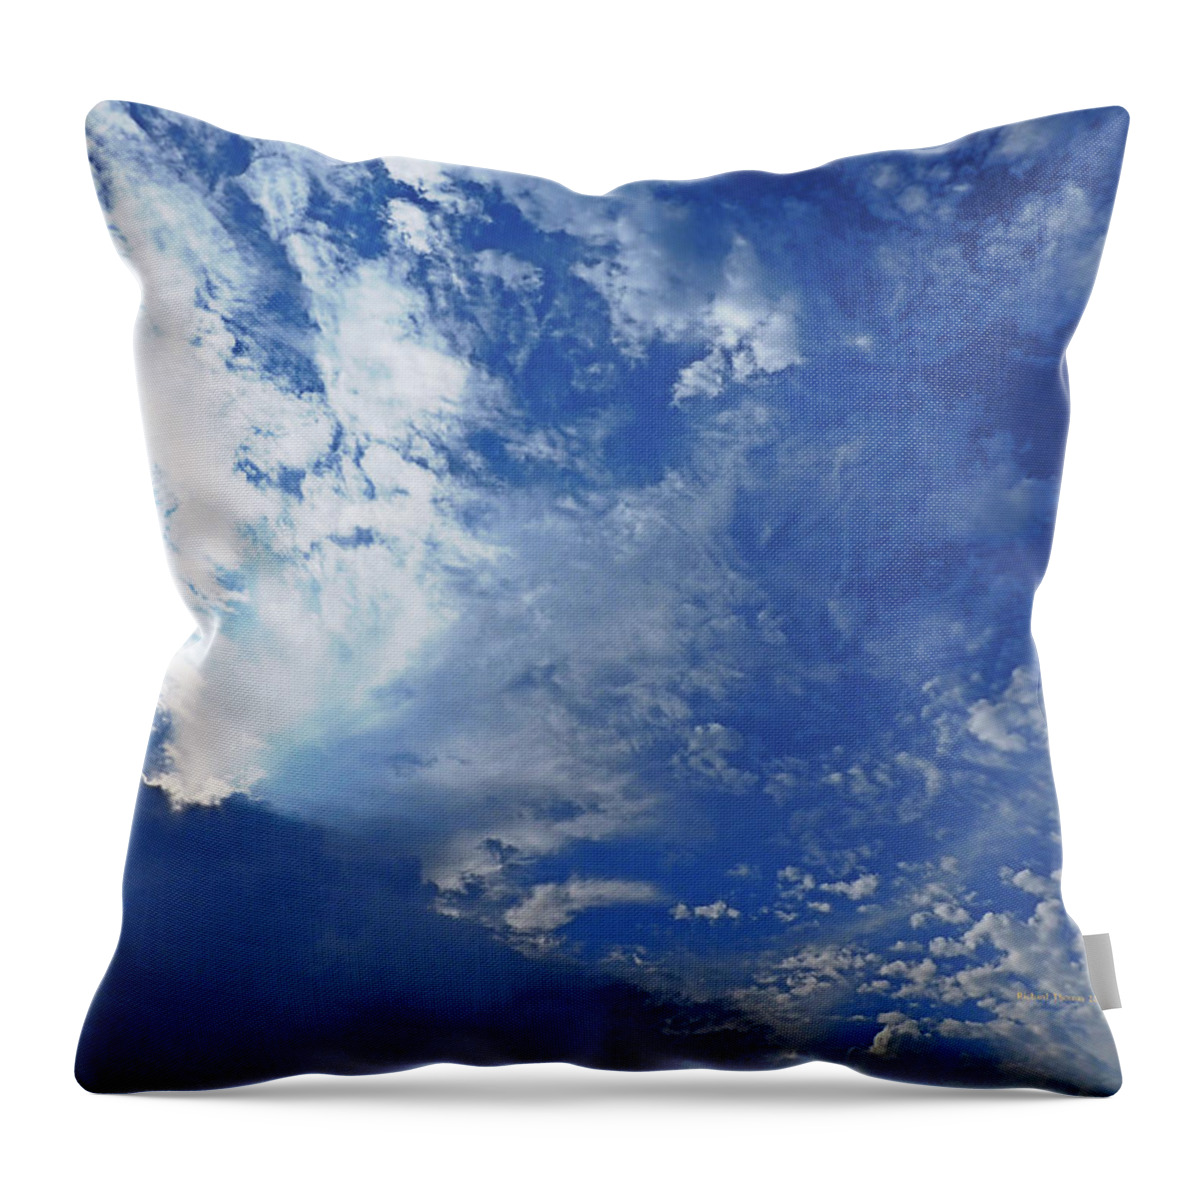 Weather Throw Pillow featuring the photograph August Rain by Richard Thomas